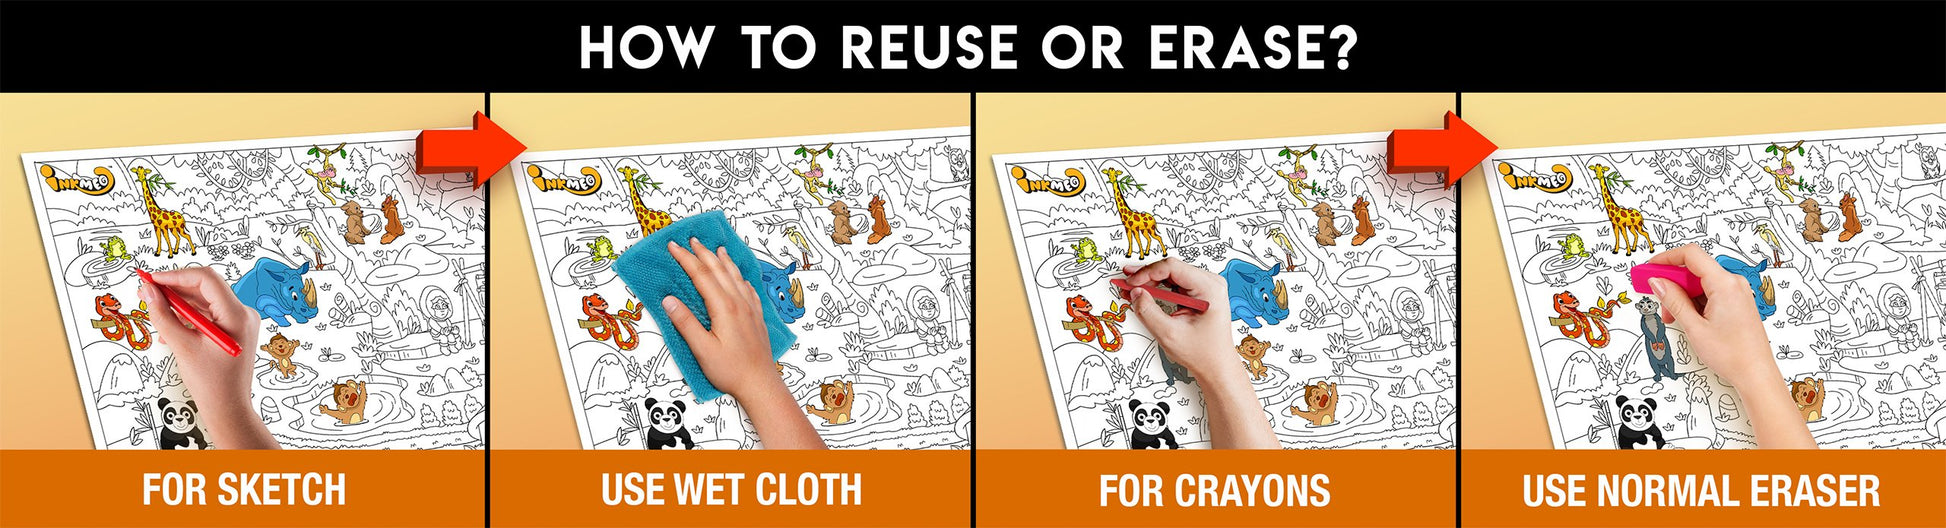 The image has a yellow background with four pictures demonstrating how to reuse or erase: the first picture depicts sketching on the sheet, the second shows using a wet cloth to remove sketches, the third image displays crayons coloring on the sheet, and the fourth image illustrates erasing crayons with a regular eraser.